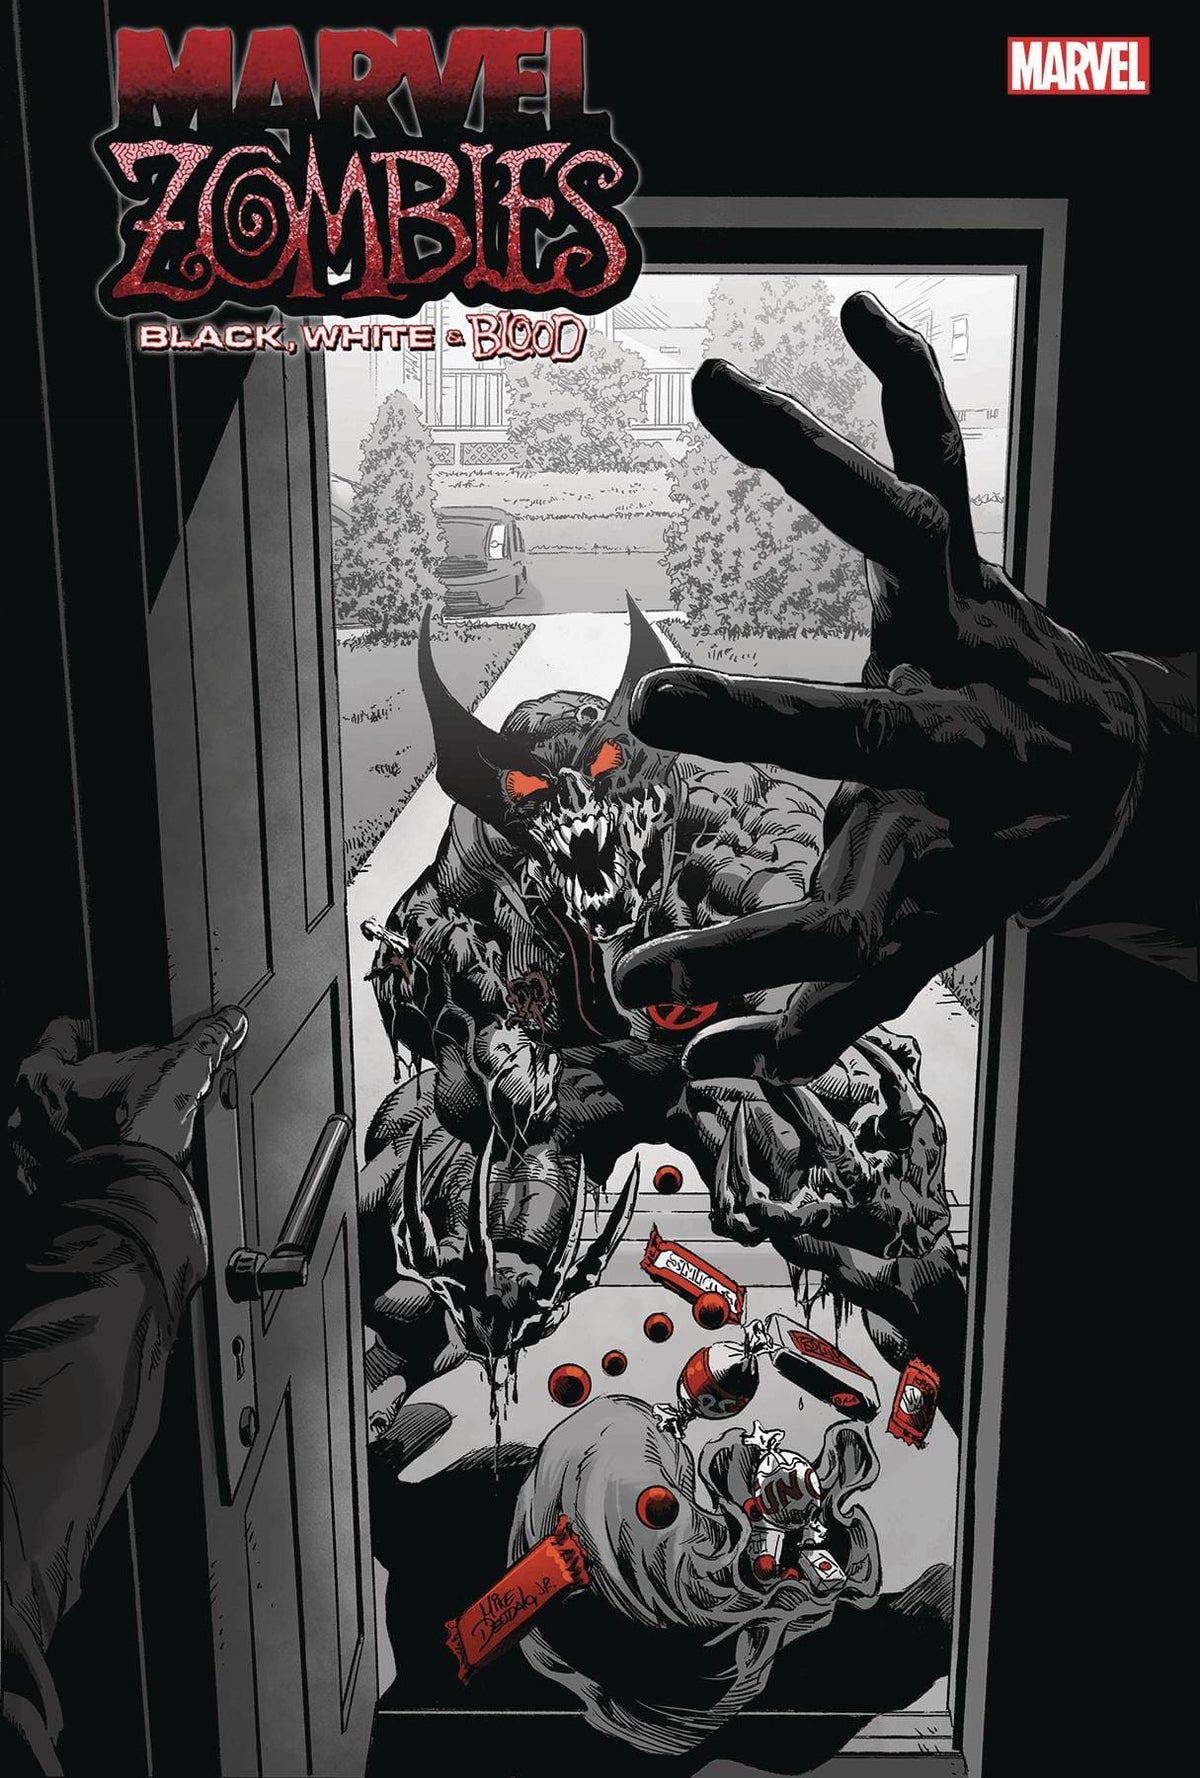 MARVEL ZOMBIES BLACK WHITE BLOOD #1 1:50 INCV UNEARTHED